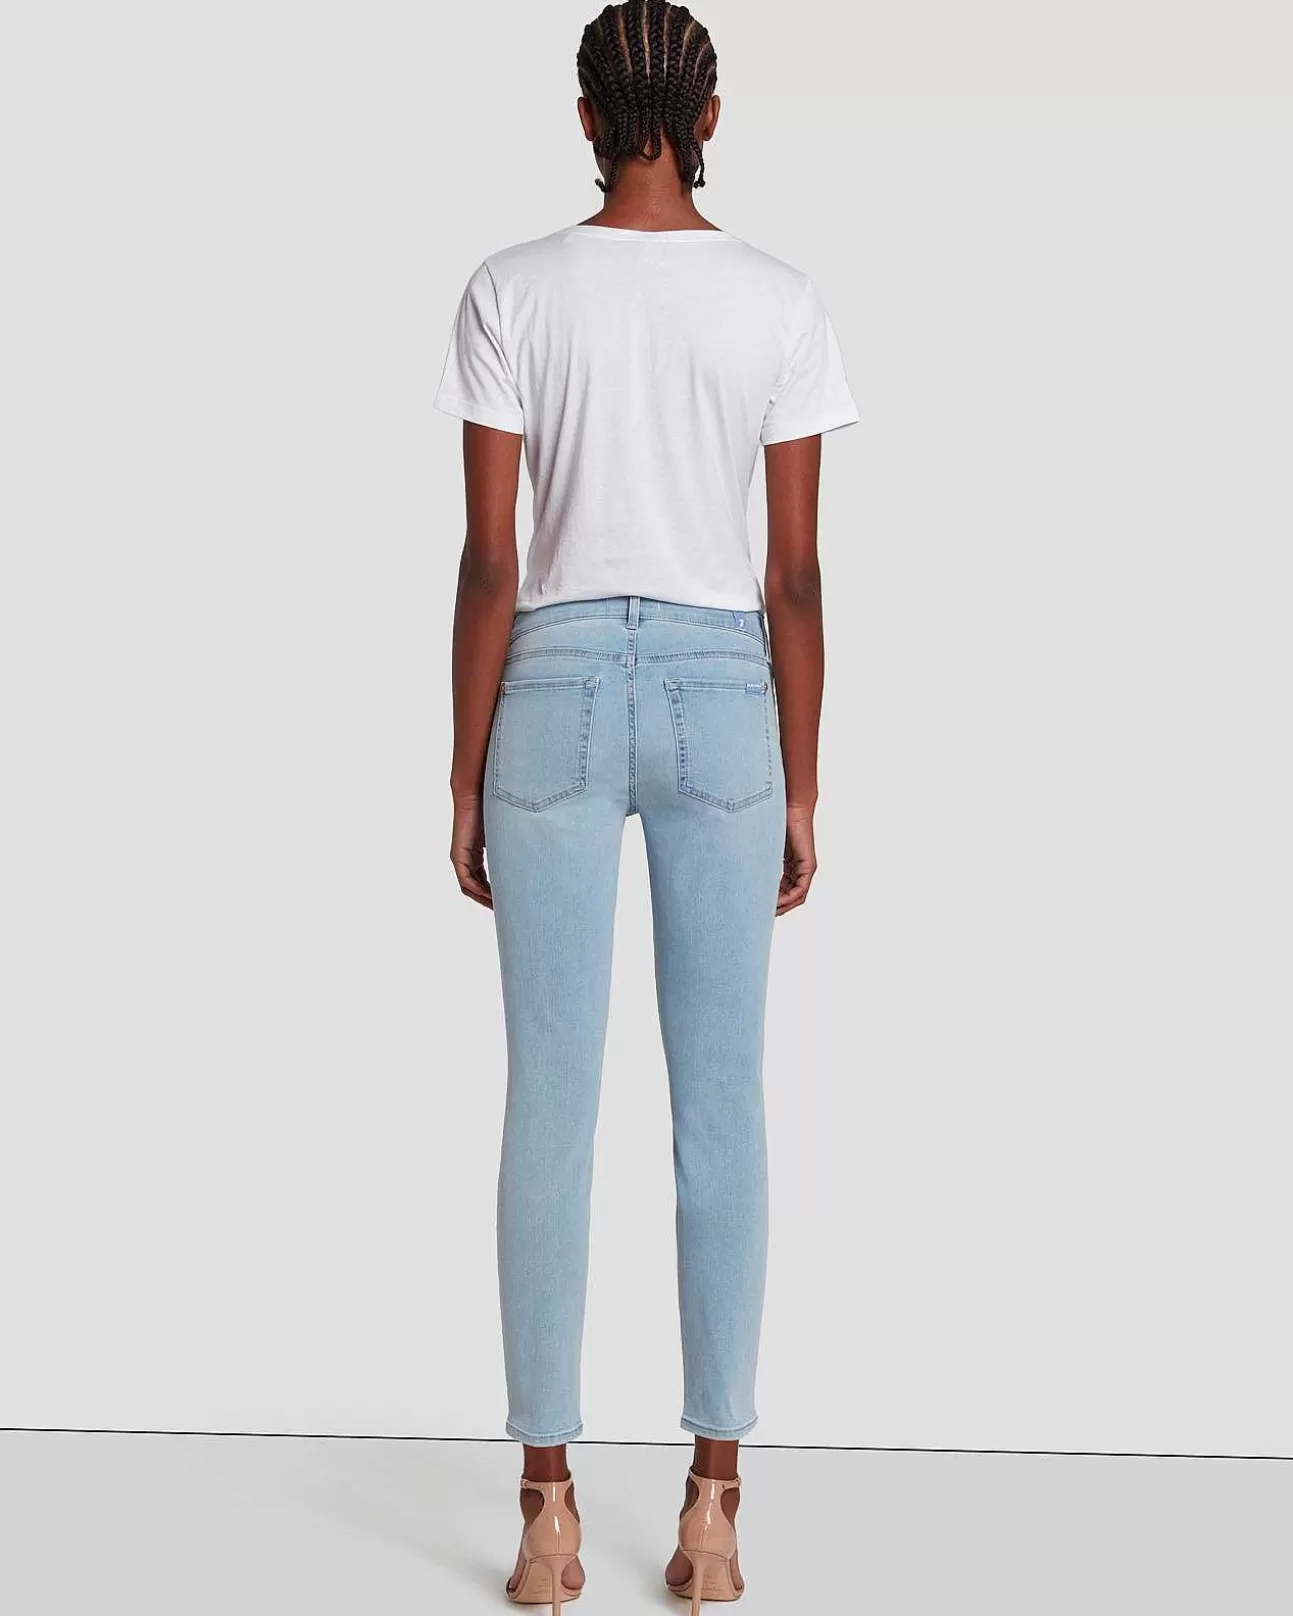 Jeans>7 For All Mankind B(Air) Ankle Skinny In Fata Morgana